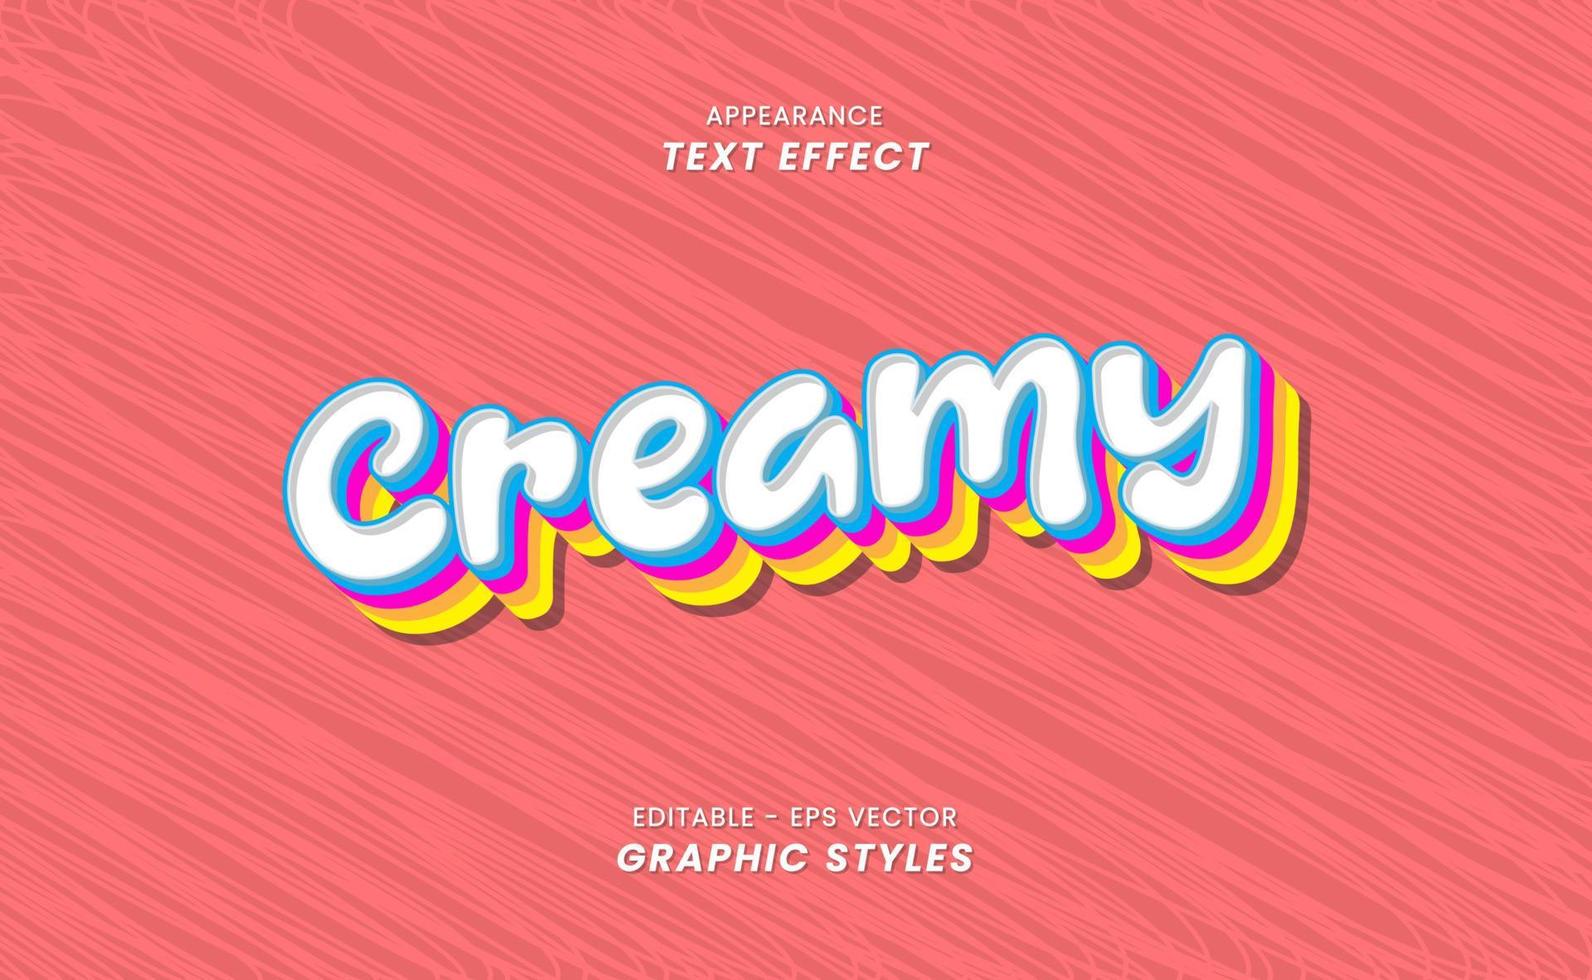 Appearance Text Effects - With Creamy Words vector